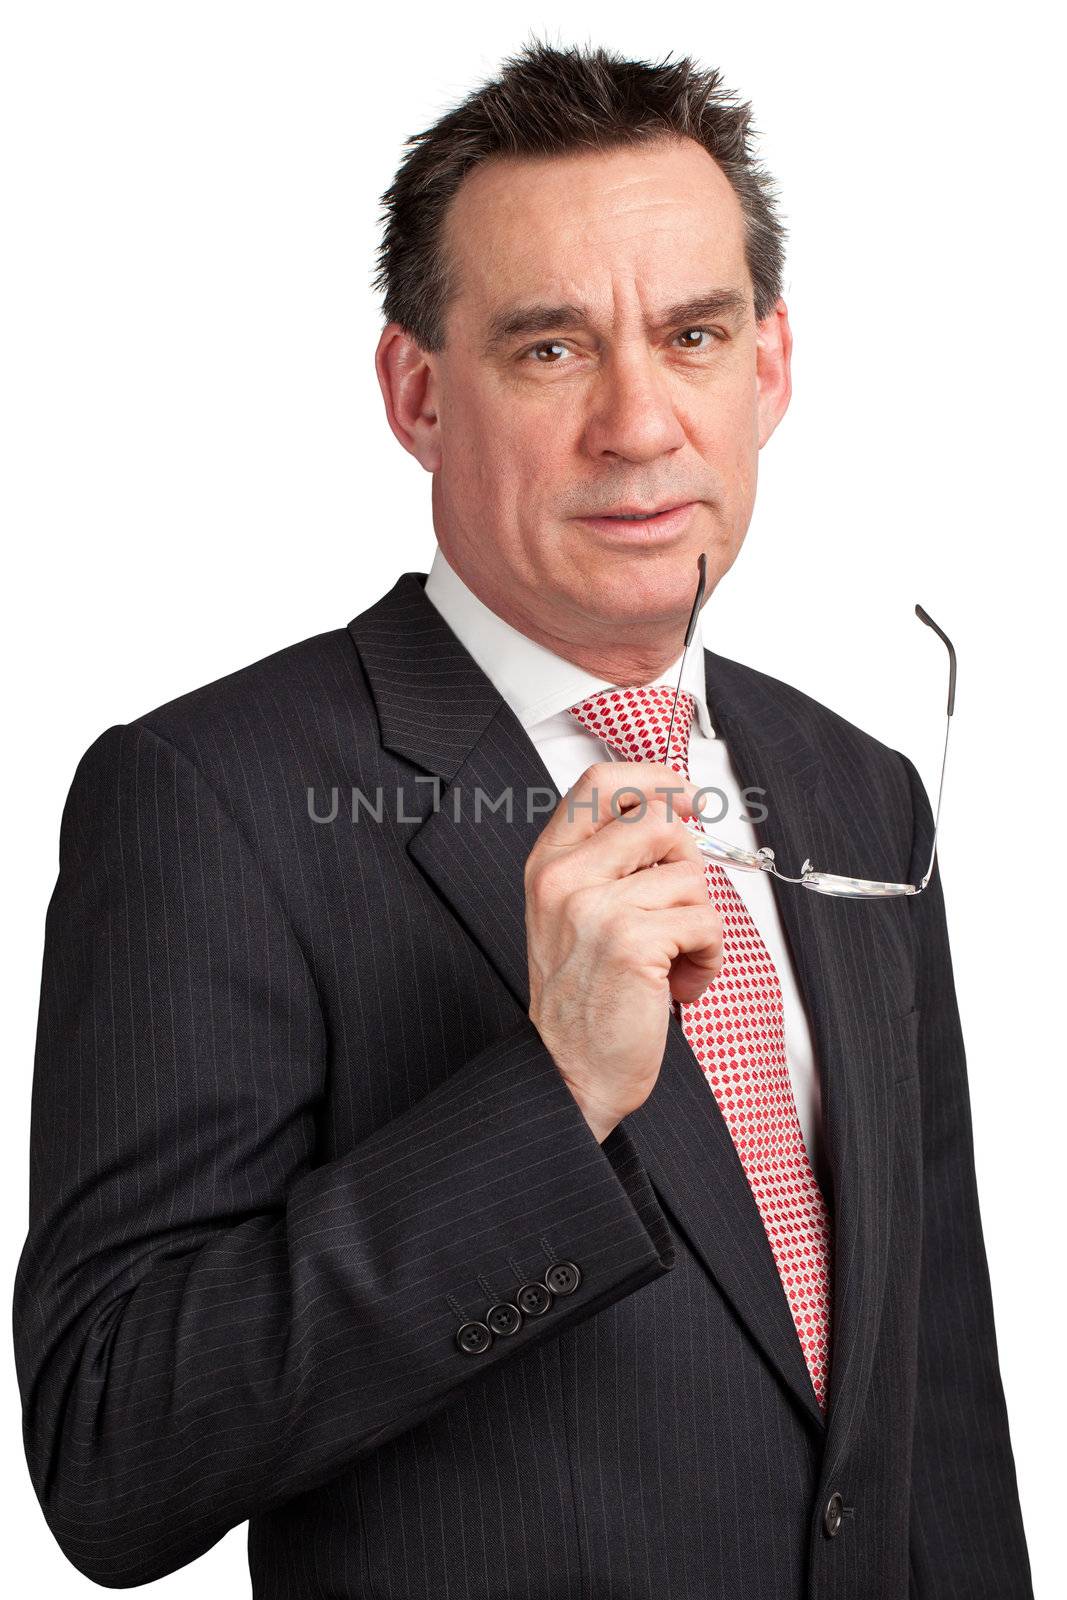 Smiling Middle Age Business Man in Suit holding glasses near face Isolated